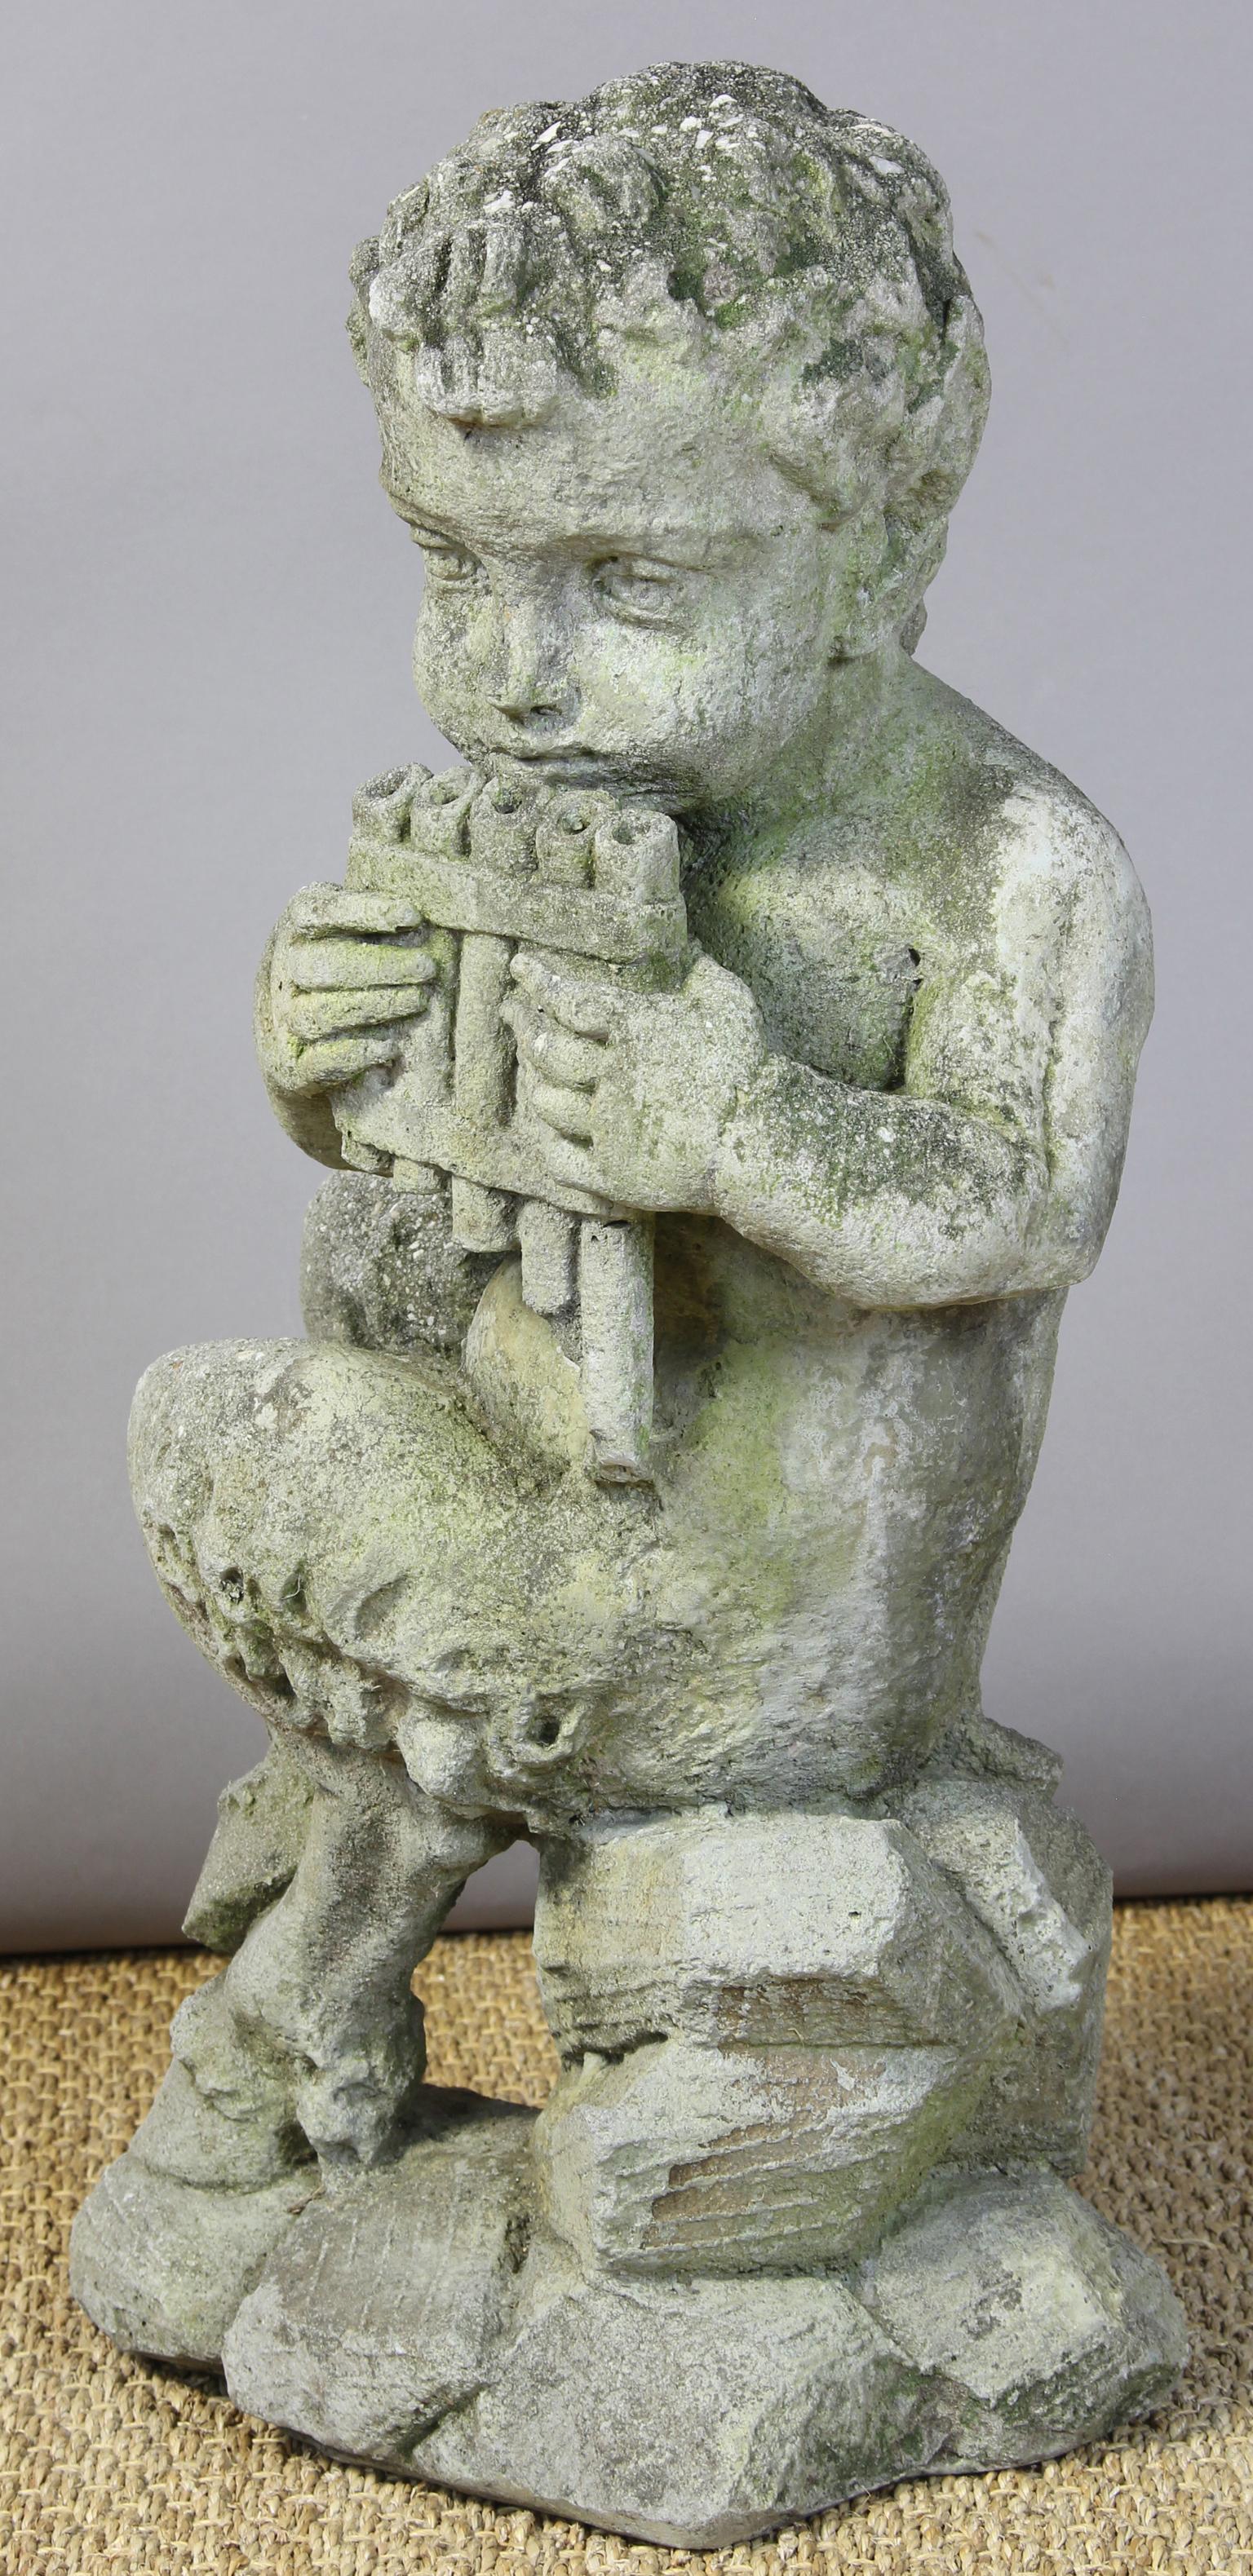 A very charming mid-20th century cast stone garden ornament of a mischievous flute-playing pan perched on a jagged crop of rocks.